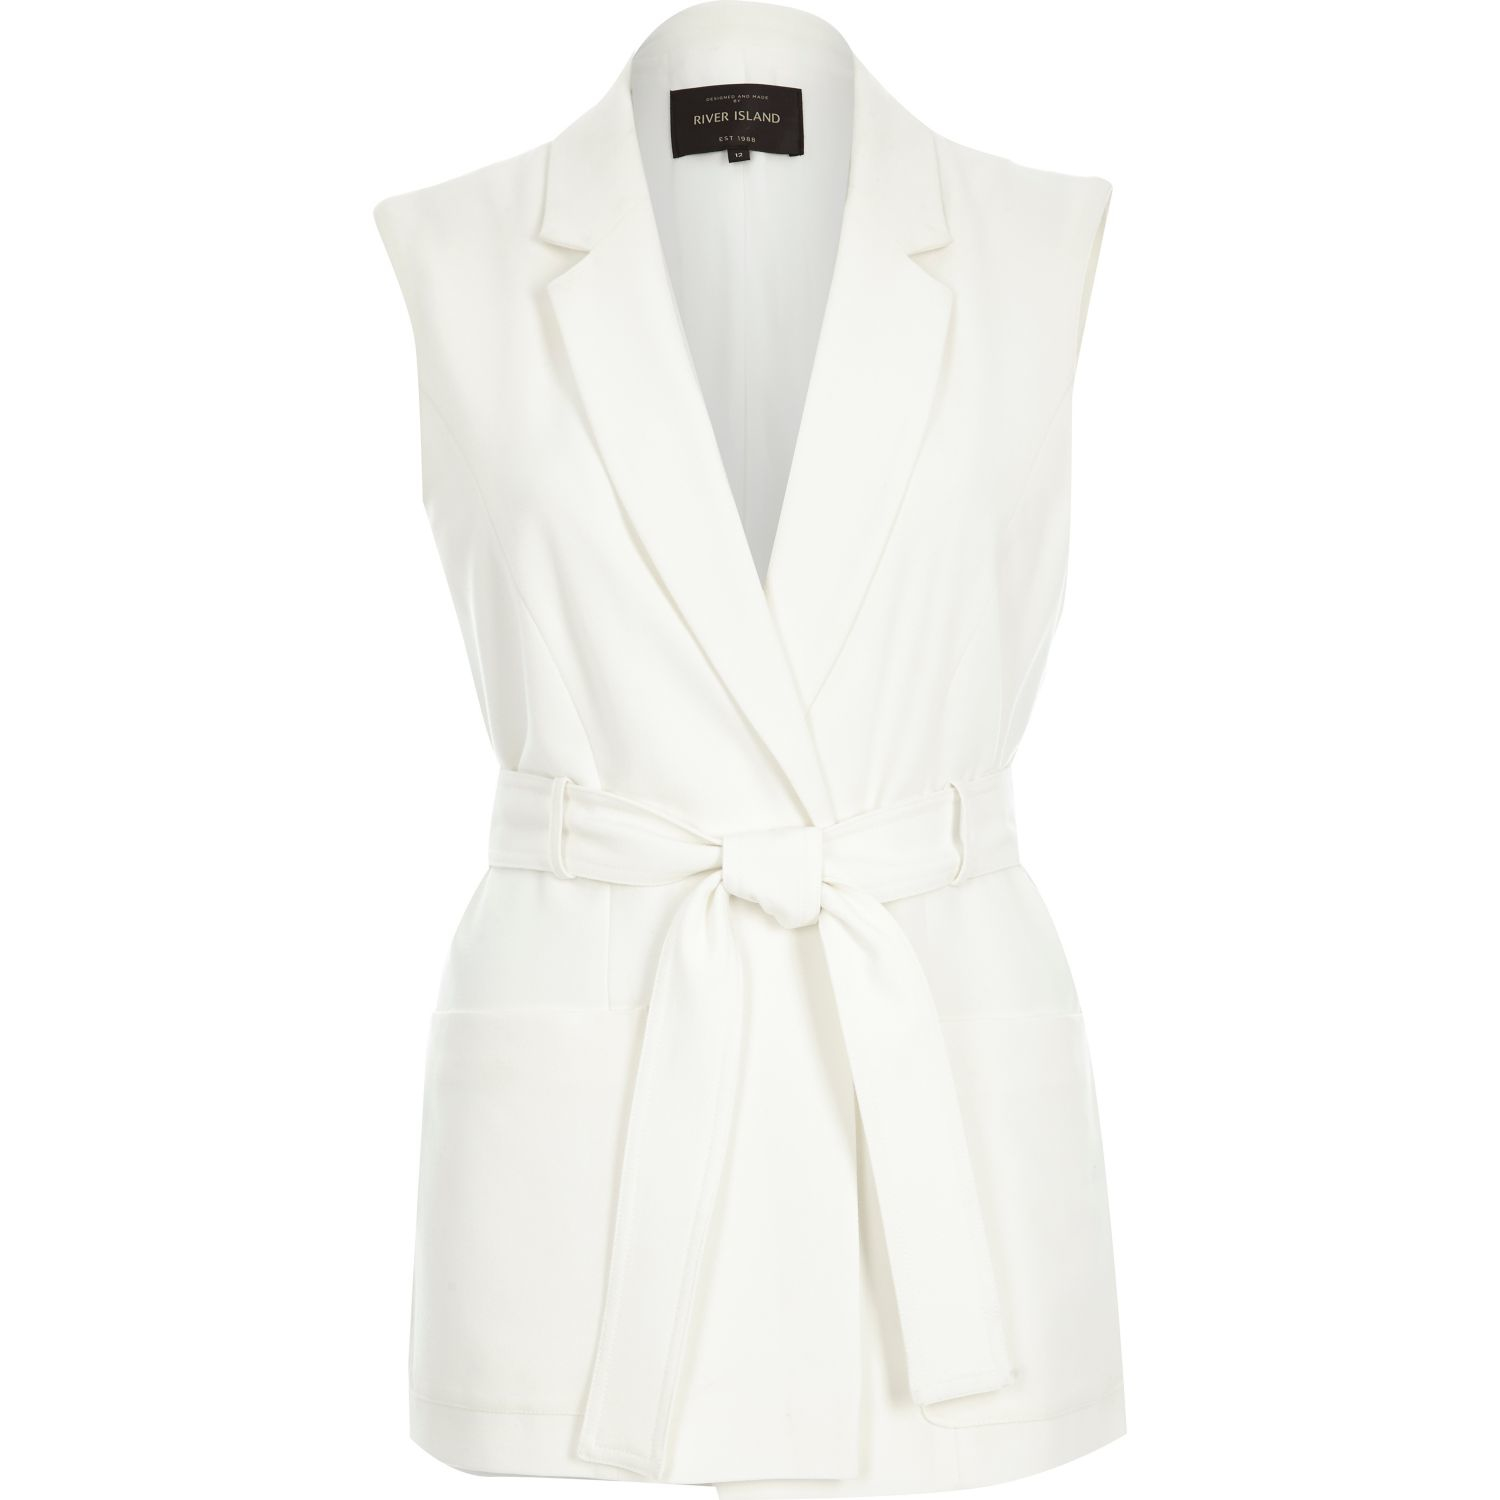 River island White Belted Sleeveless Jacket in White